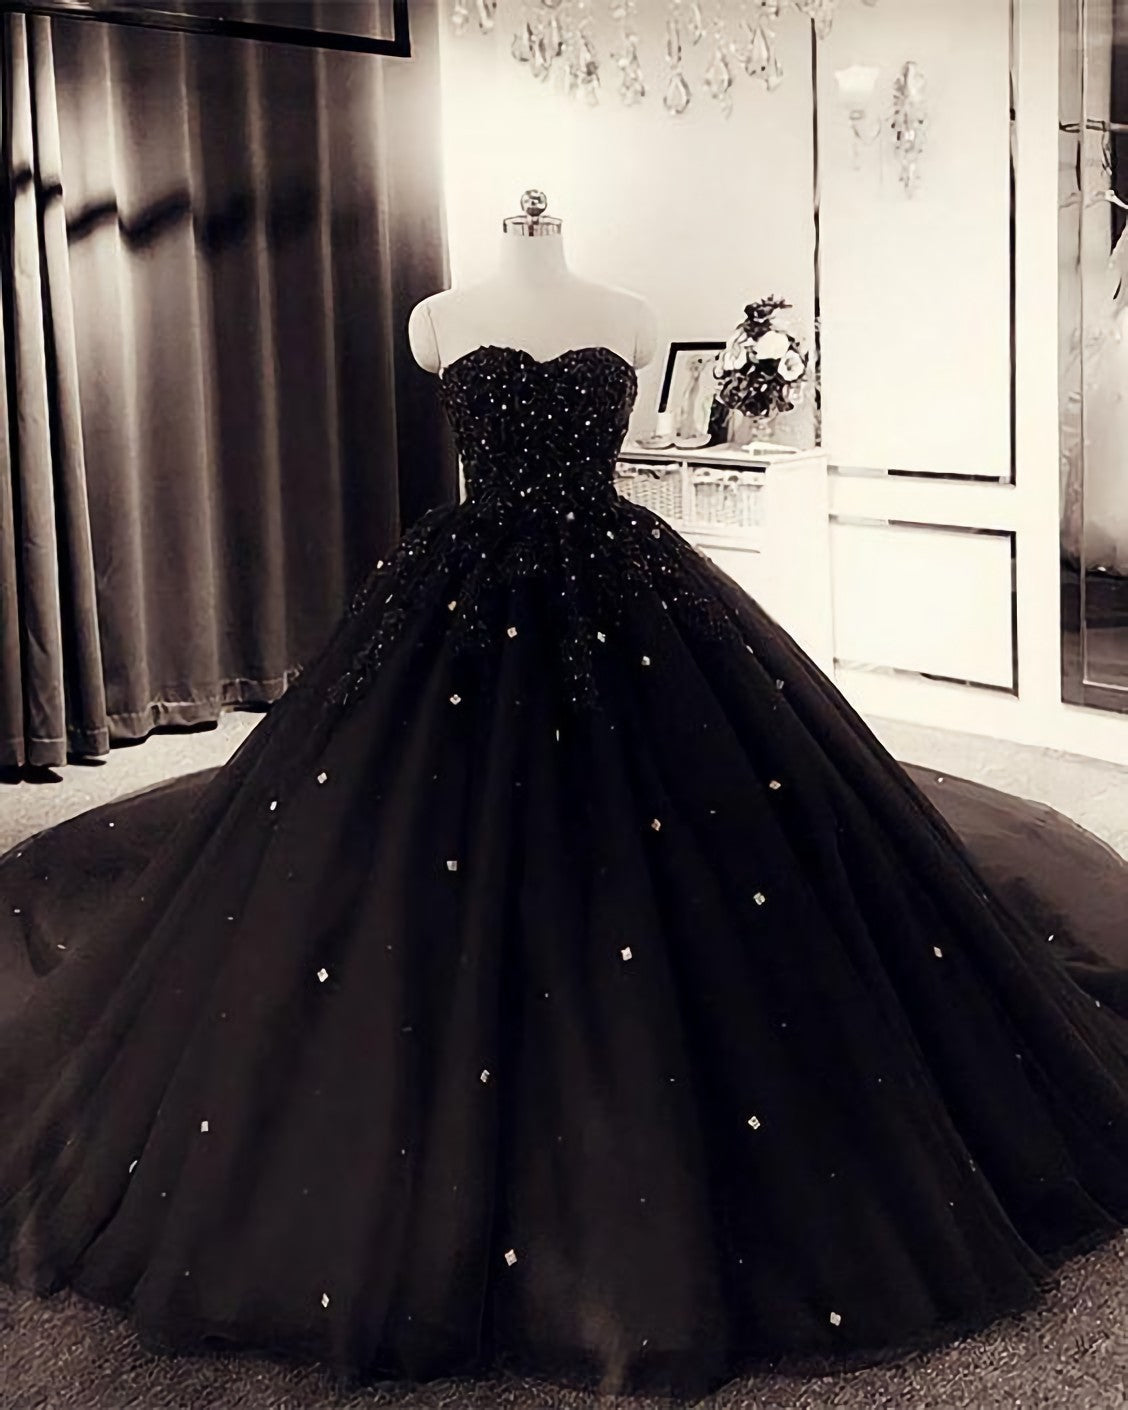 Black Quinceanera Corset Ball Gown Dresses, Corset Prom Dresses outfit, Evening Dresses For Sale